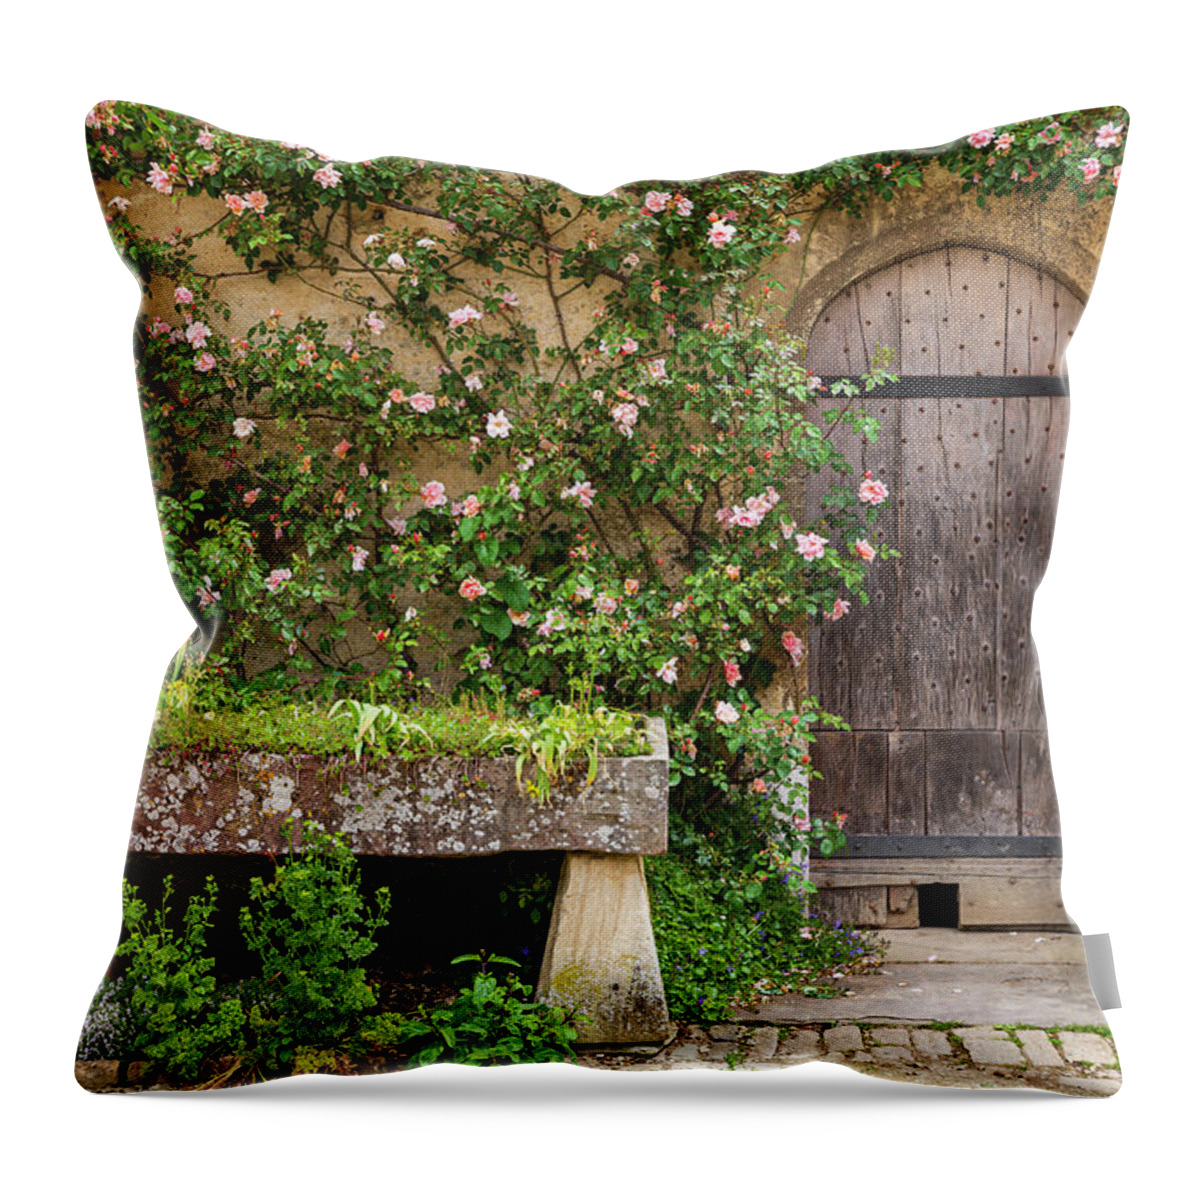 3scape Throw Pillow featuring the photograph Lacock Abbey Courtyard Door by Adam Romanowicz